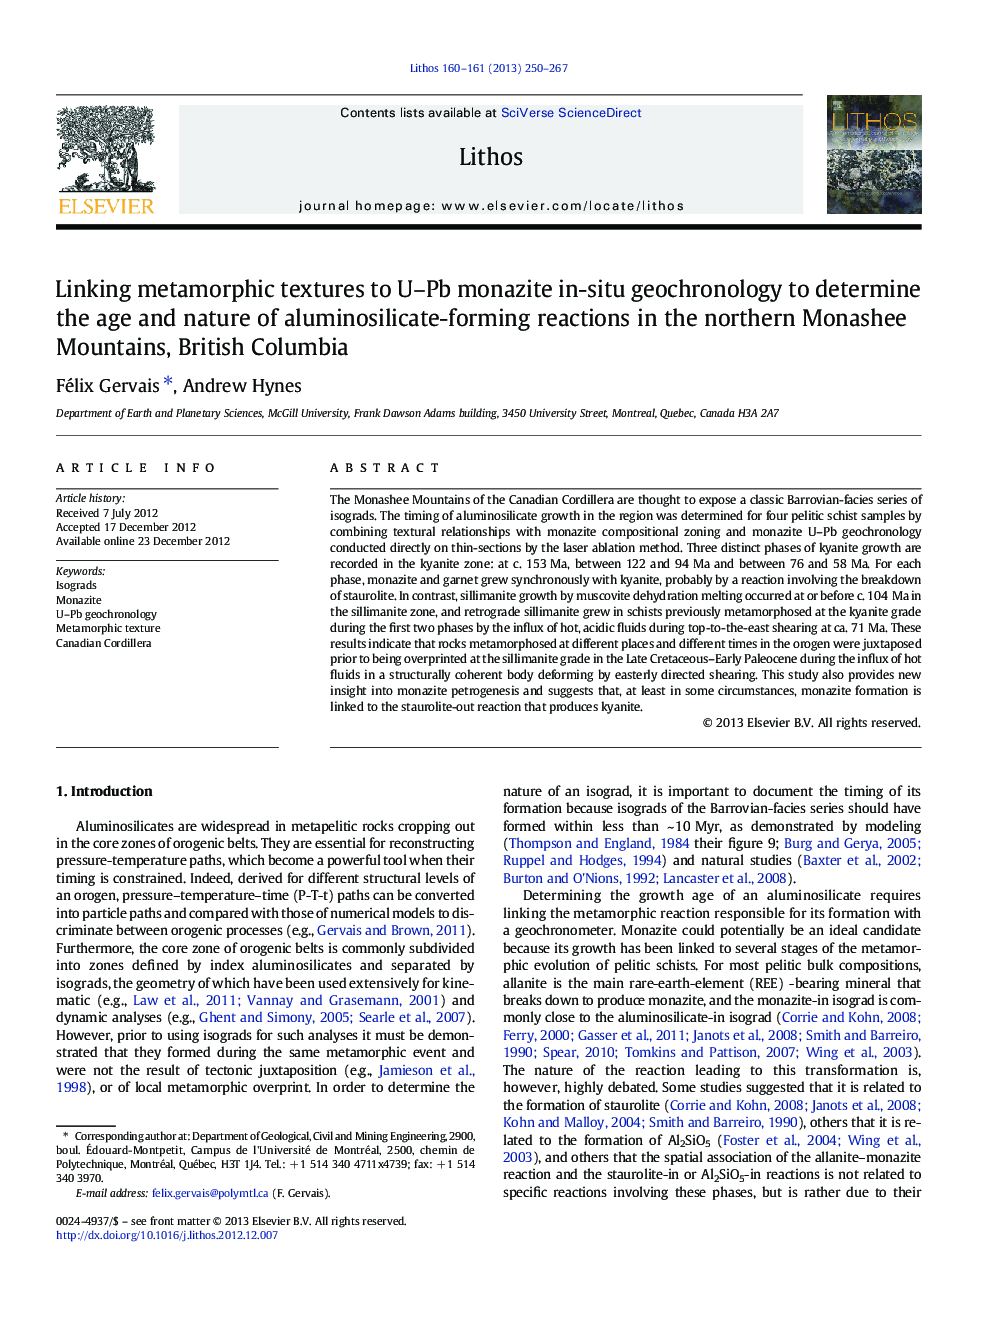 Linking metamorphic textures to U–Pb monazite in-situ geochronology to determine the age and nature of aluminosilicate-forming reactions in the northern Monashee Mountains, British Columbia